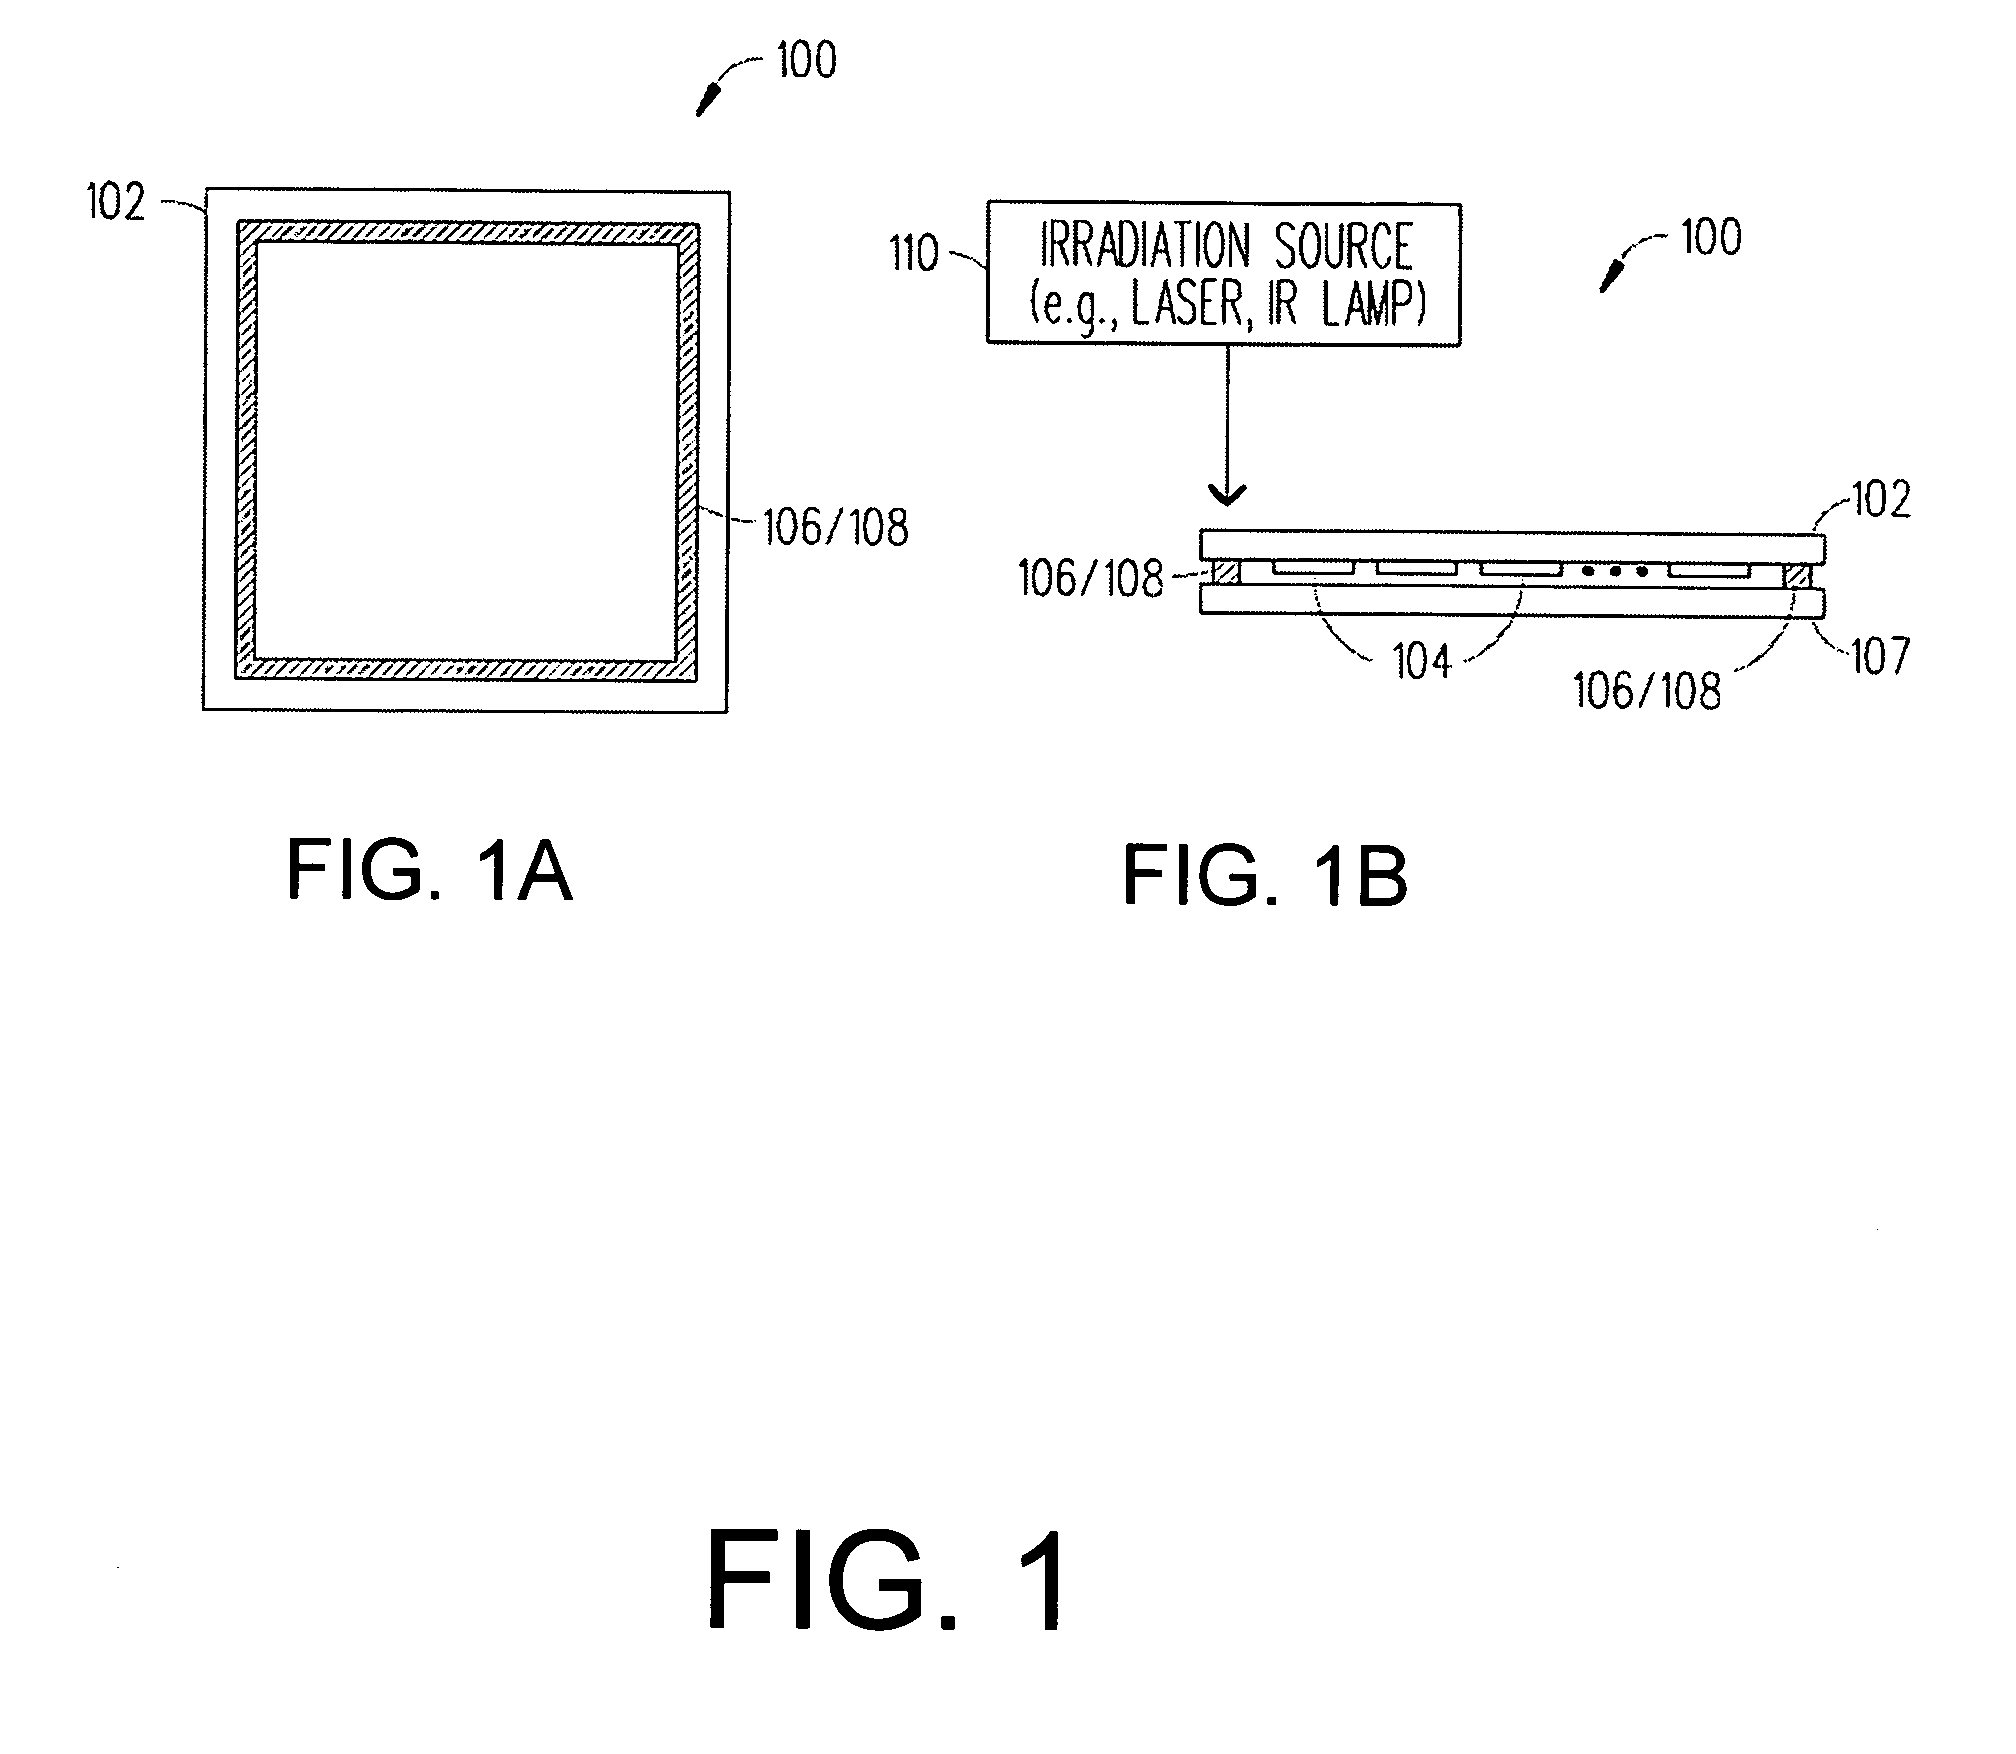 Boro-silicate glass frits for hermetic sealing of light emitting device displays